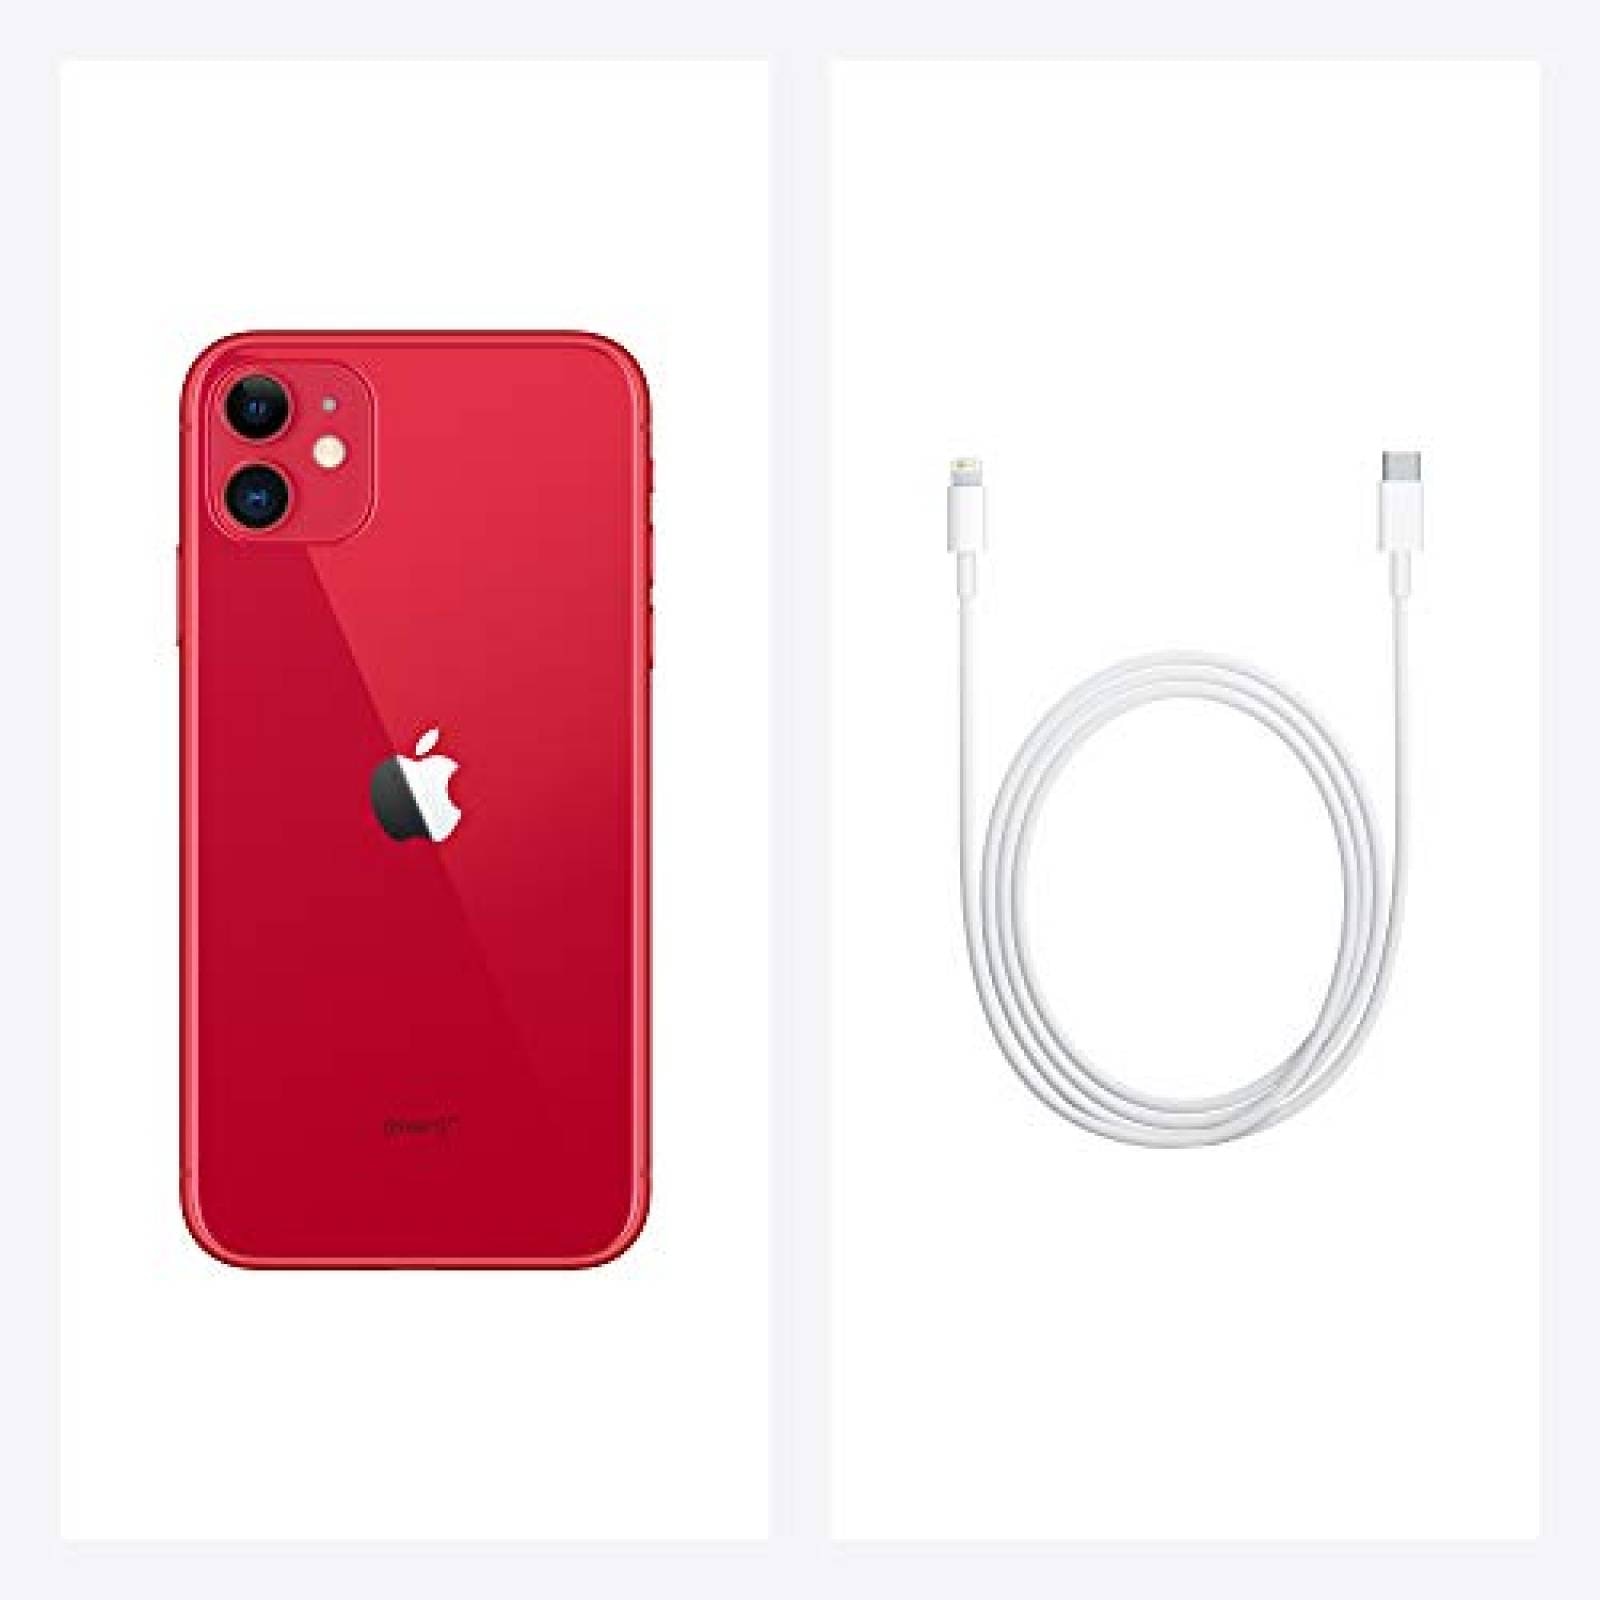 Apple iphone 11 128 gb product red - Sears